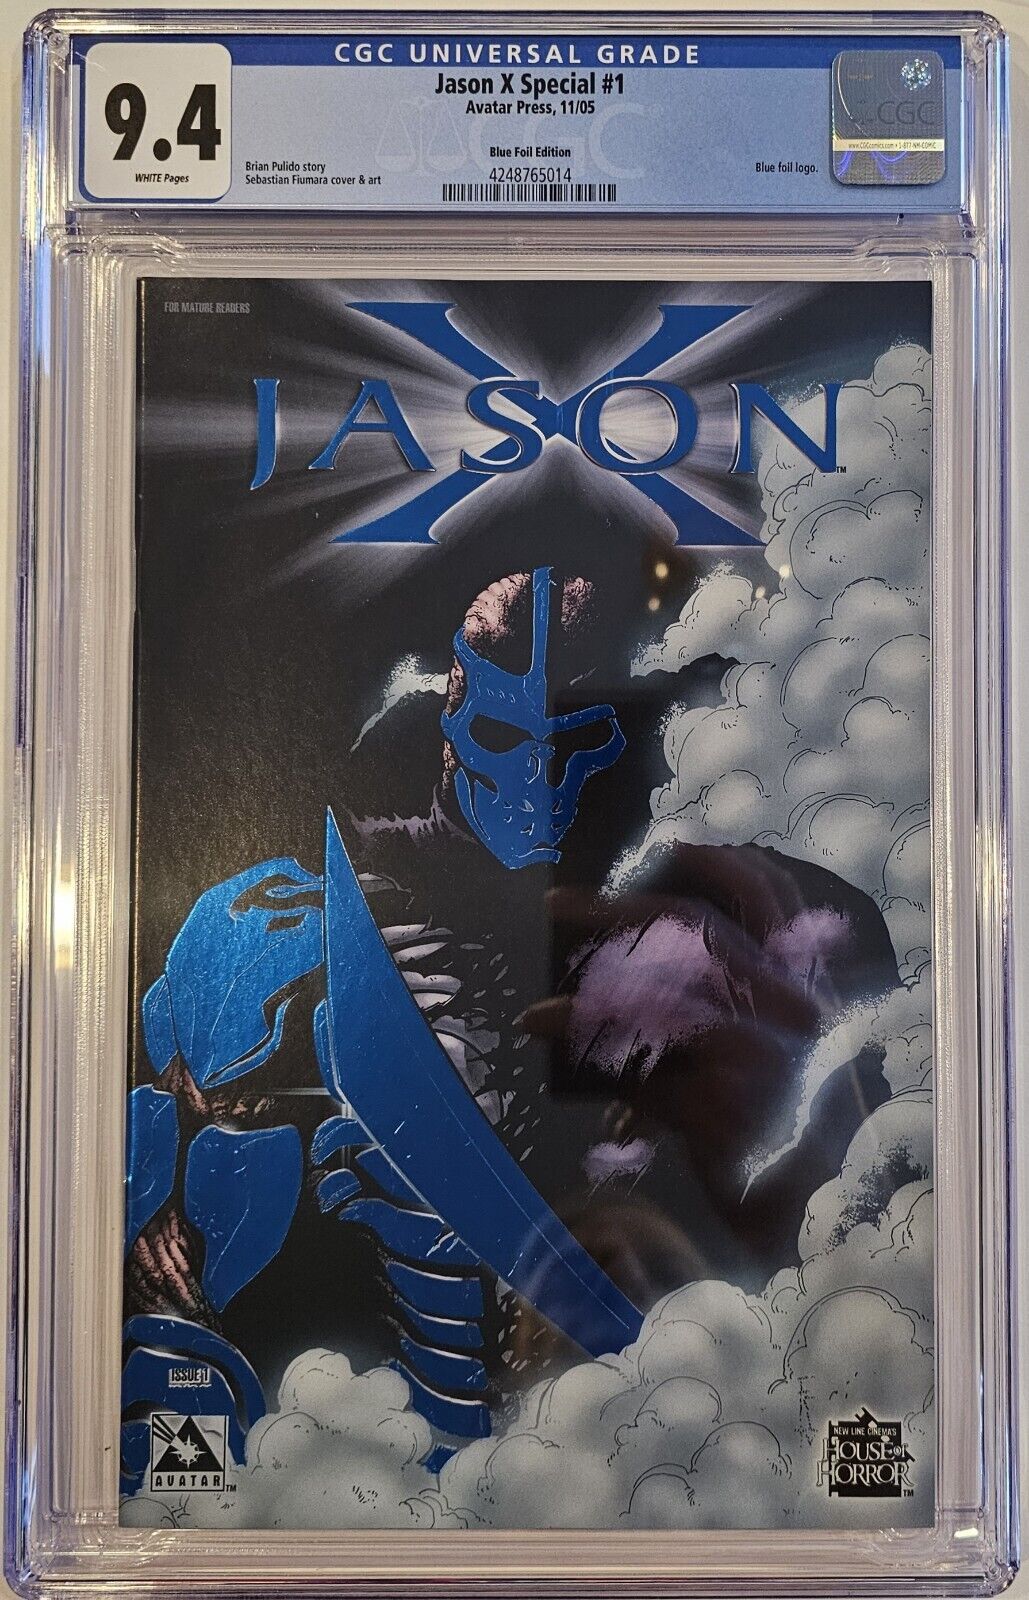 CGC 9.4 FRIDAY THE 13TH JASON X SPECIAL #1 BLUE FOIL ED w/ COA Ltd to 100 Copies